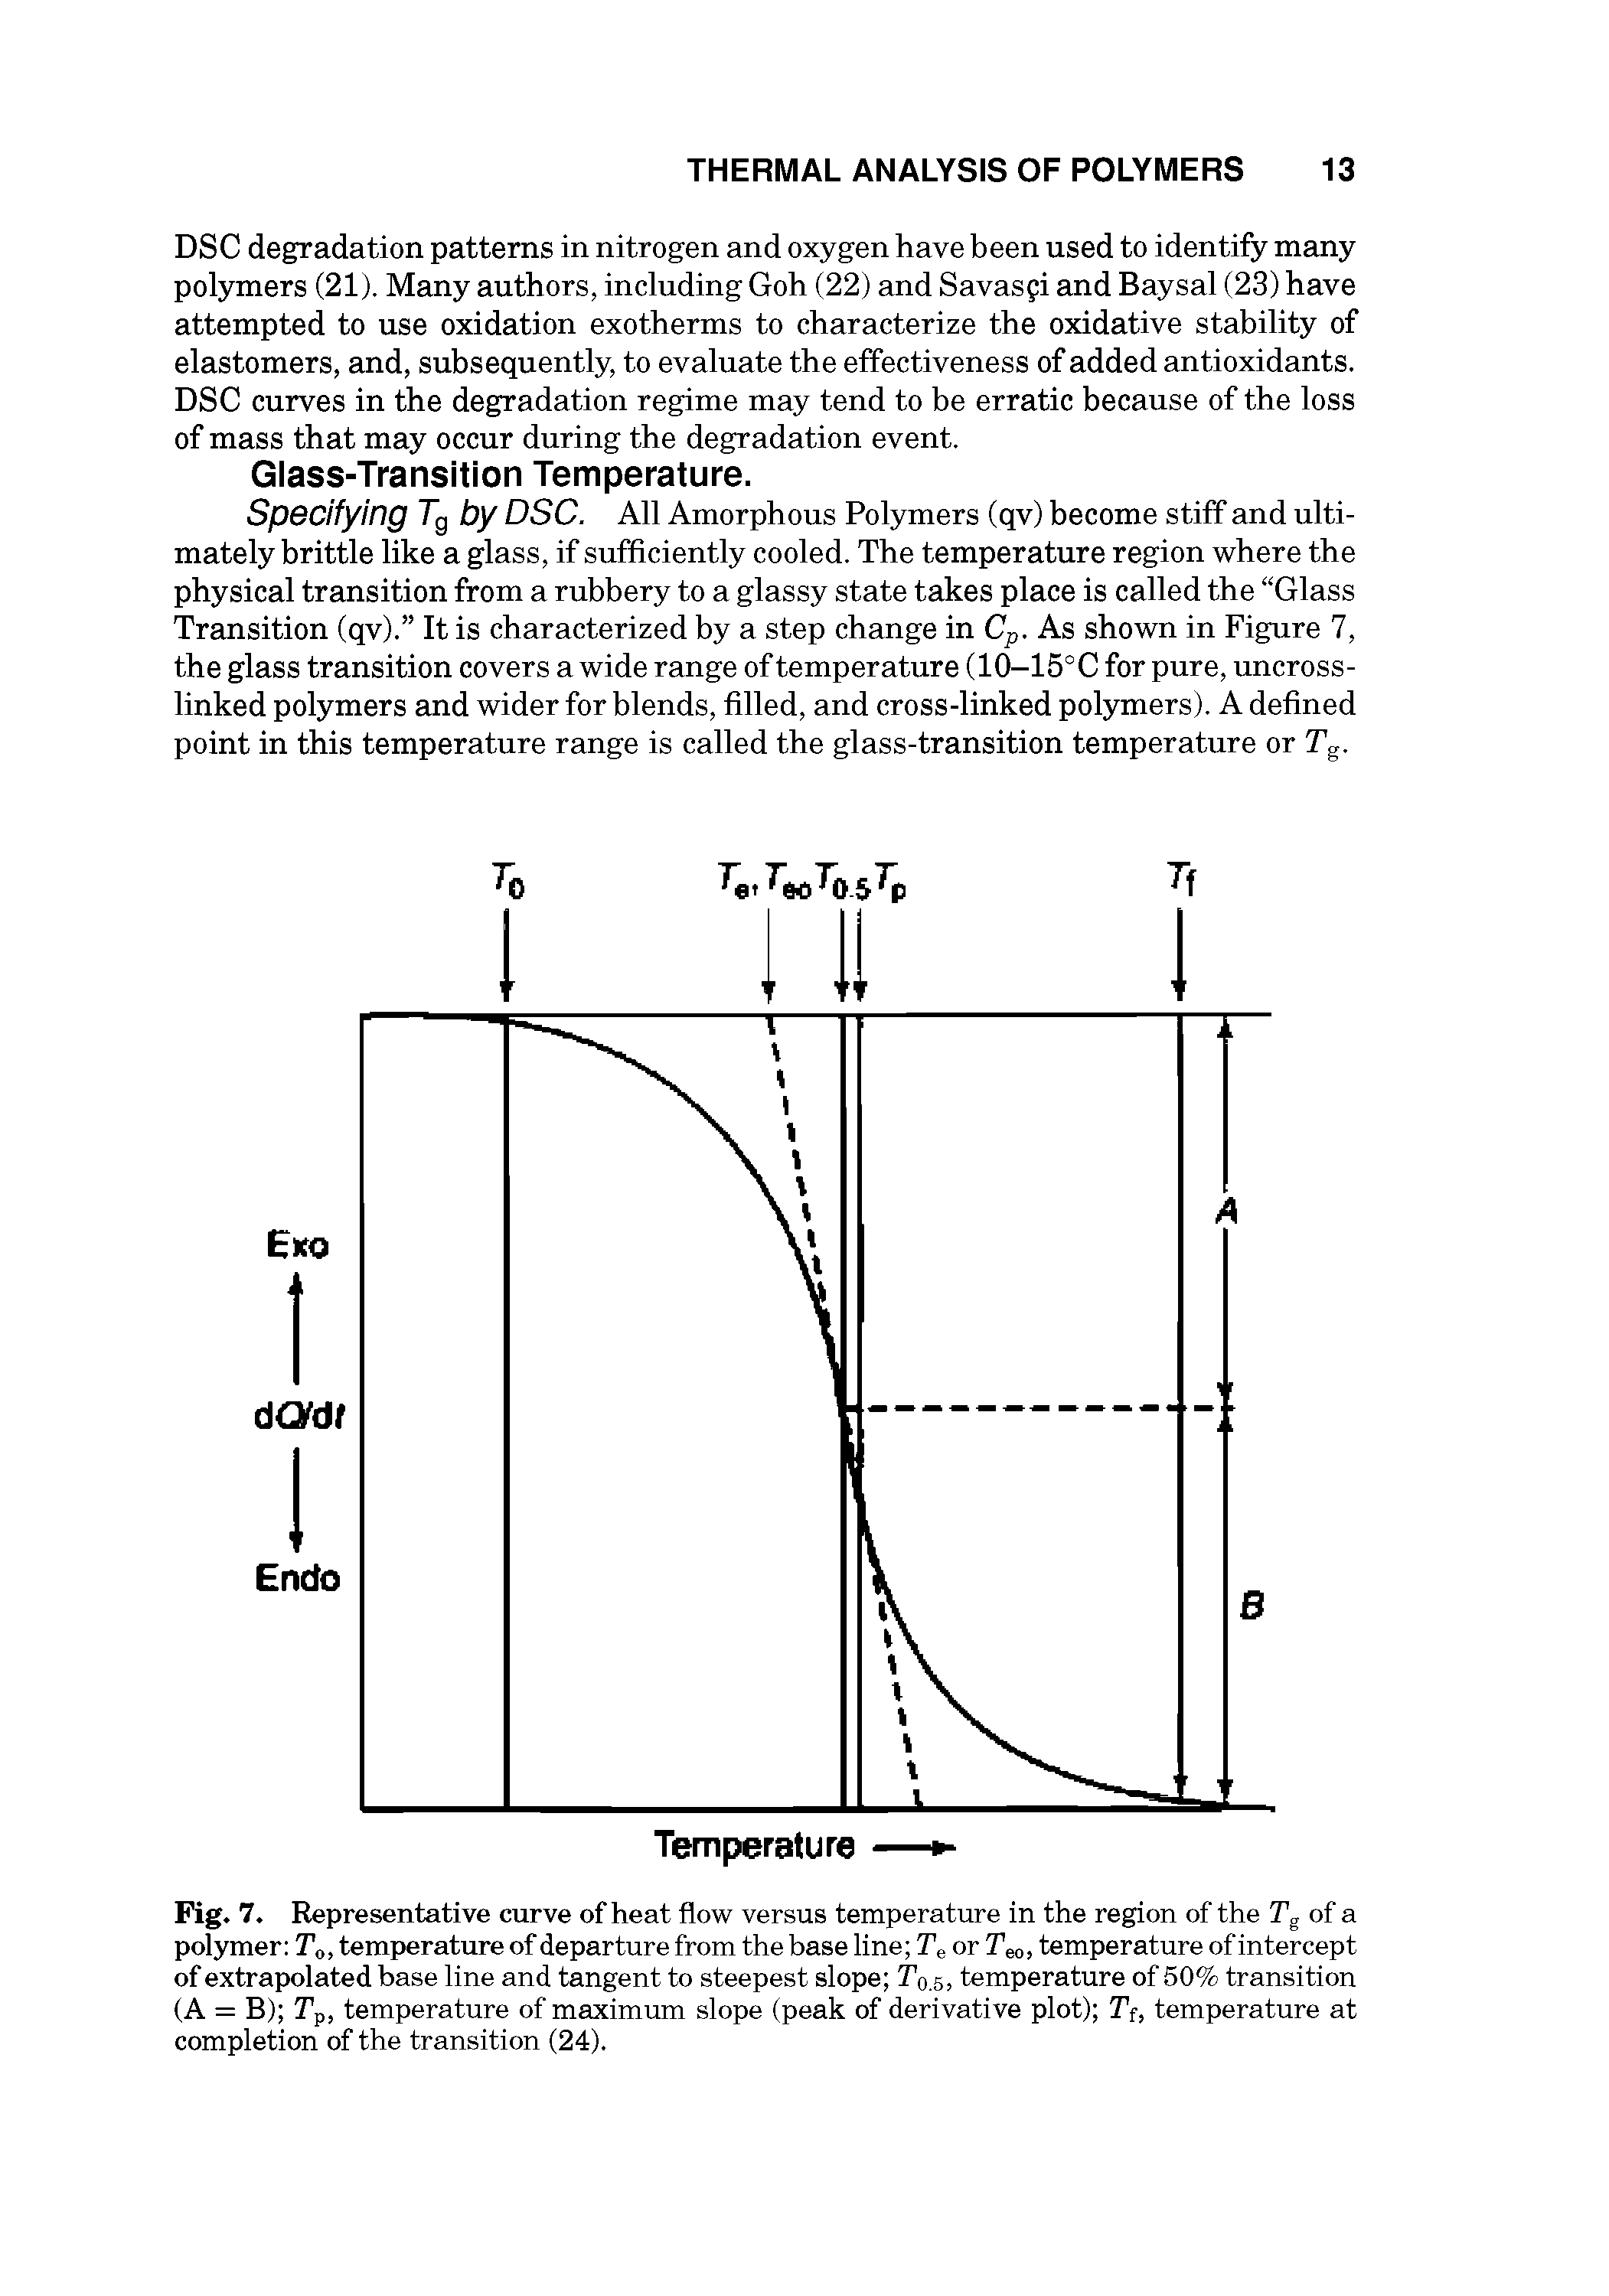 Fig. 7. Representative curve of heat flow versus temperature in the region of the Tg of a polymer To, temperature of departure from the base line To or Too, temperature of intercept of extrapolated base line and tangent to steepest slope Tq.s, temperature of 50% transition (A = B) Tp, temperature of maximum slope (peak of derivative plot) Tf, temperature at completion of the transition (24).